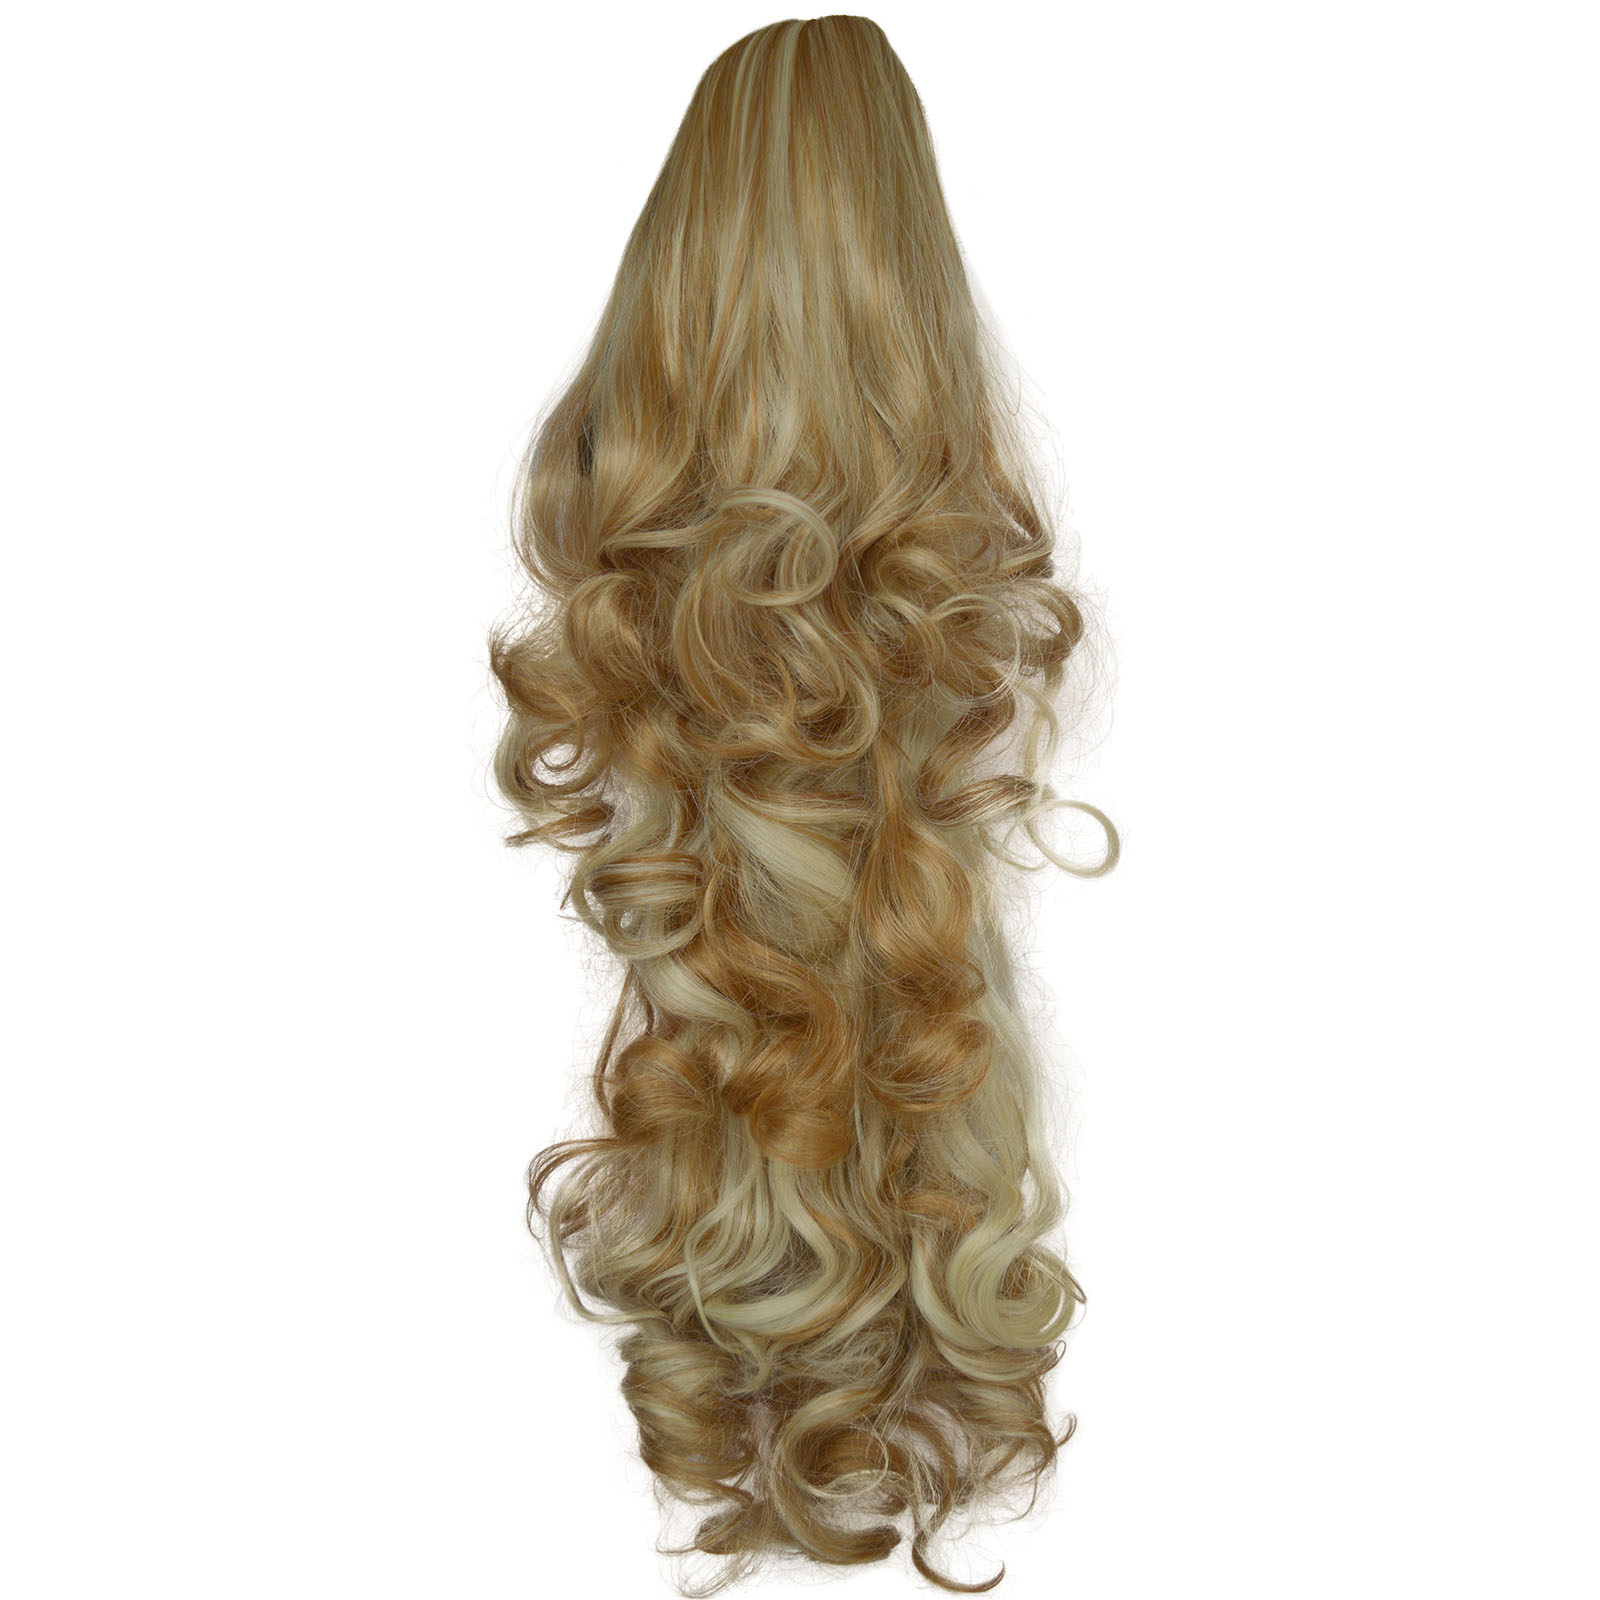 22 Ponytail Clip In Hair Extensions Falling Curls Strawberry